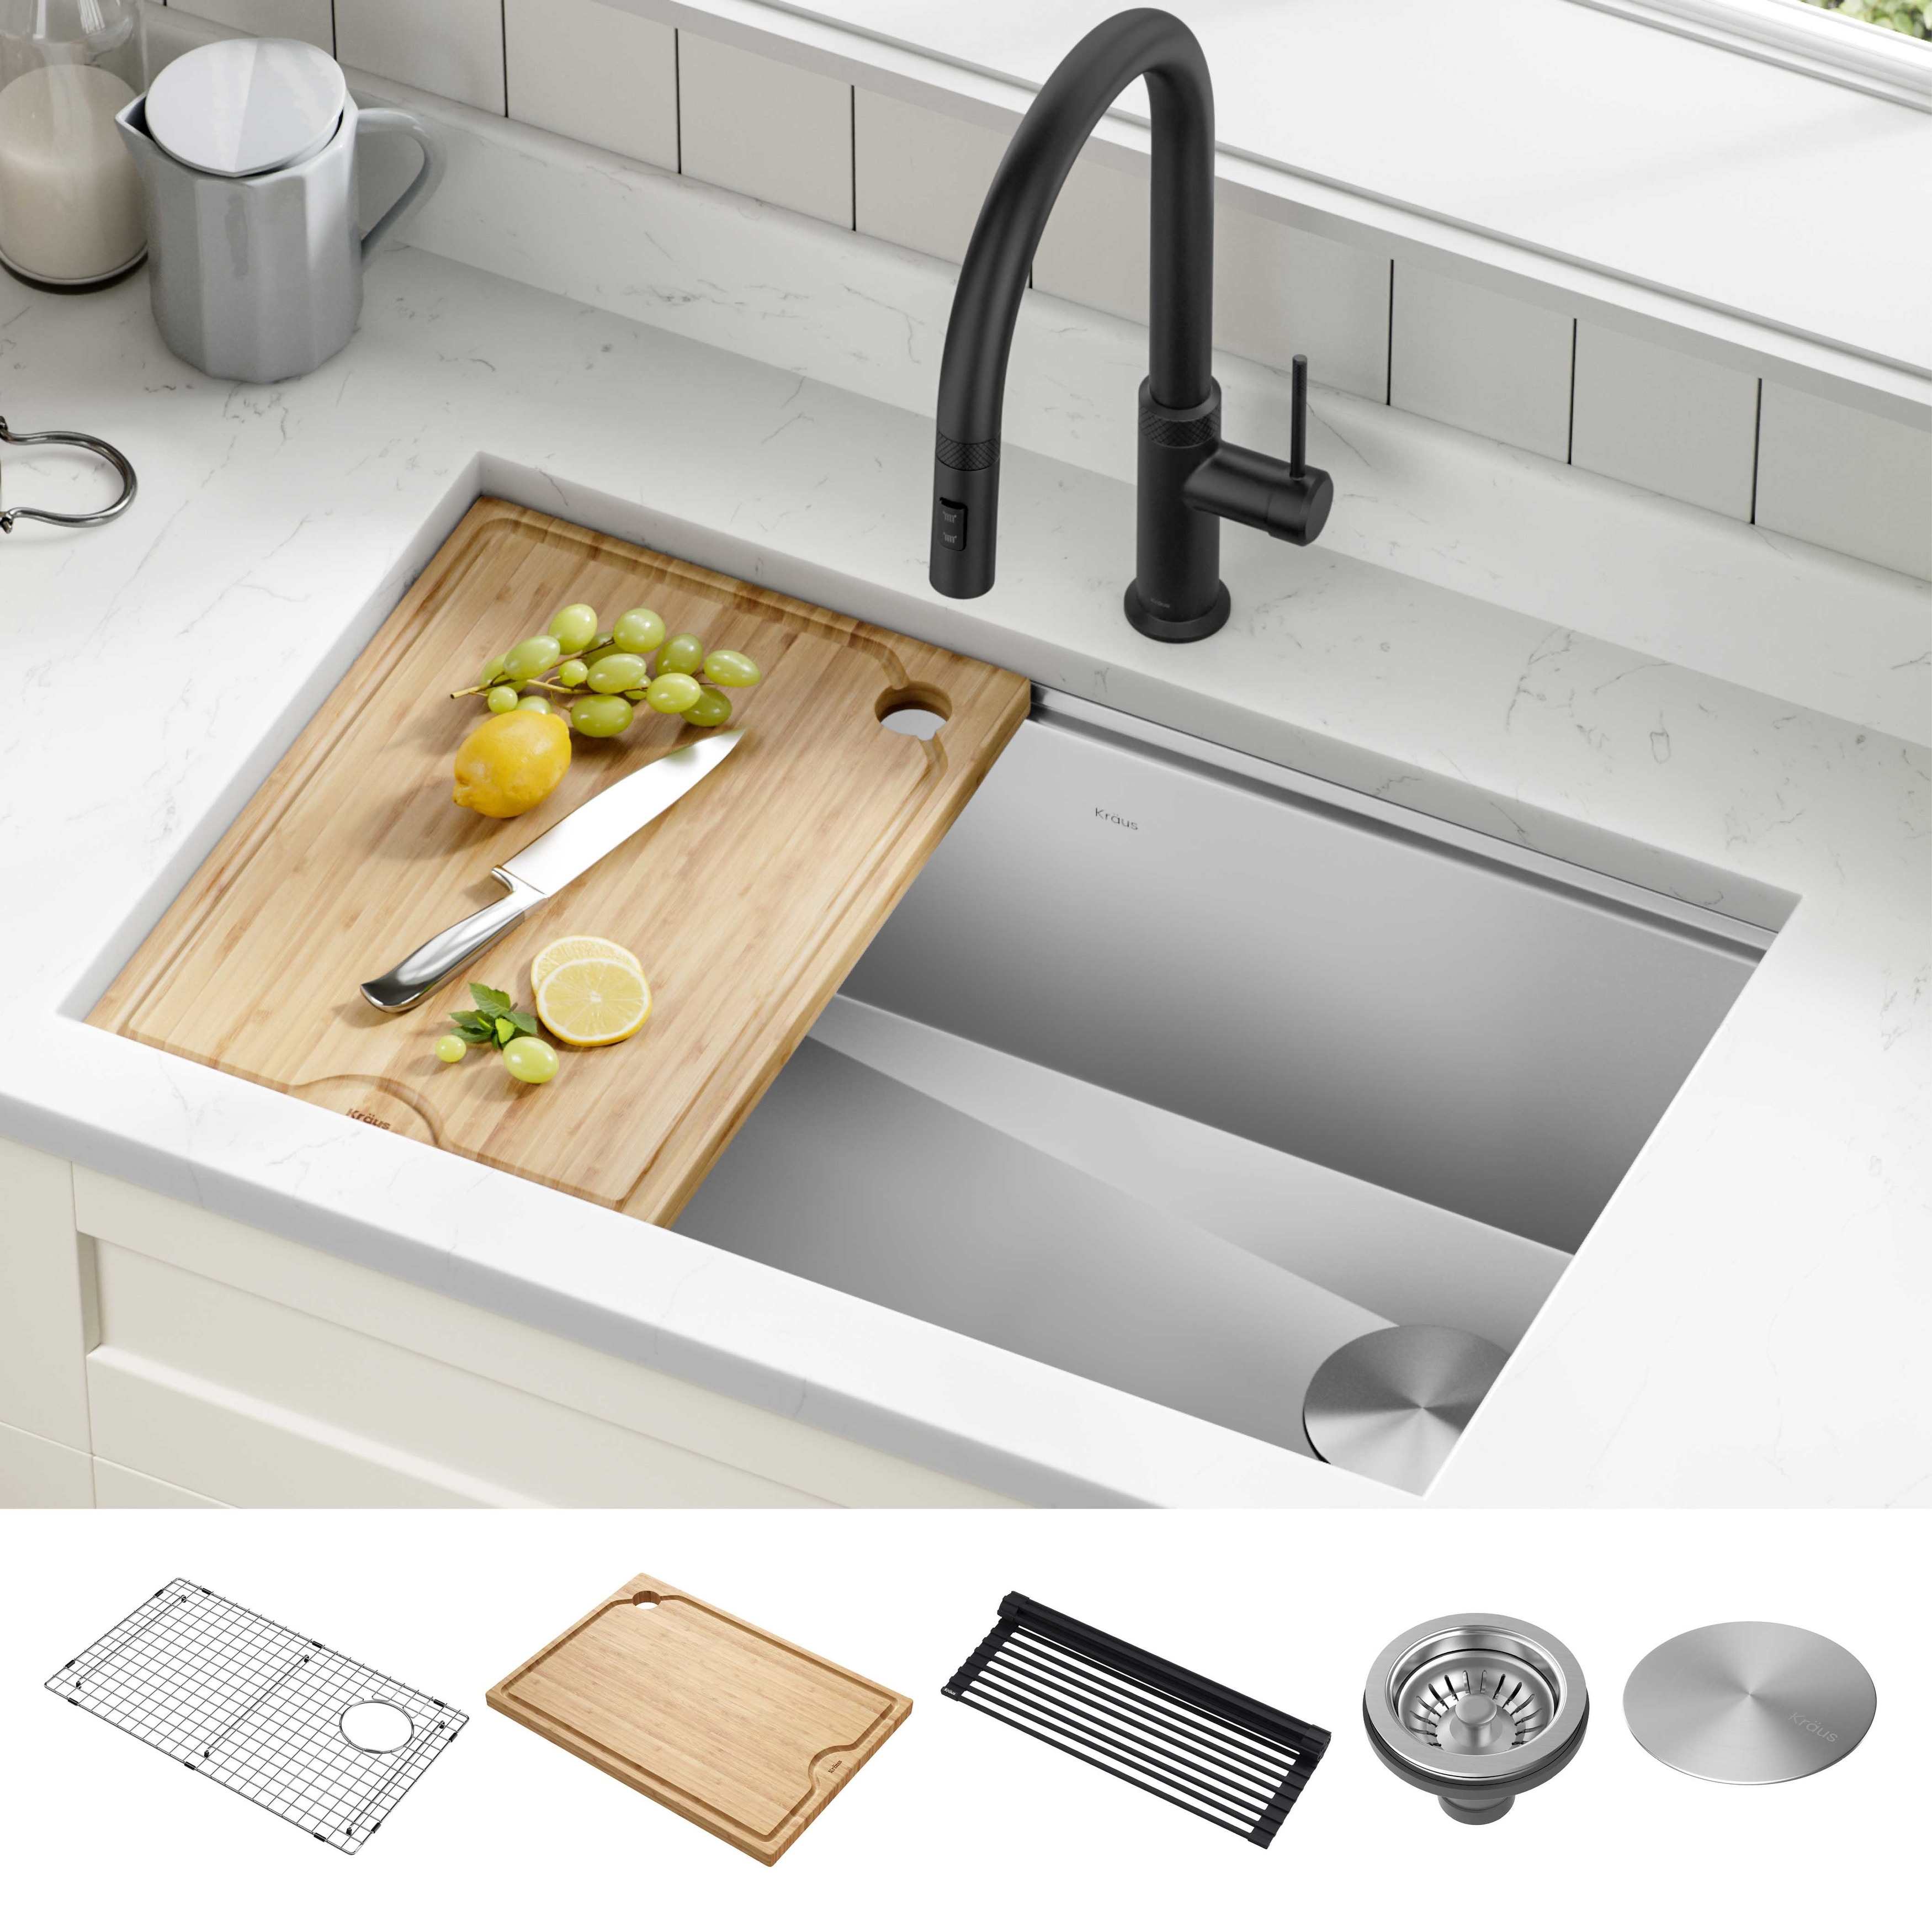 https://ak1.ostkcdn.com/images/products/is/images/direct/3ed937035e76885f531219c110eb7b7cafa59139/KRAUS-Kore-Workstation-Undermount-Stainless-Steel-Kitchen-Sink.jpg